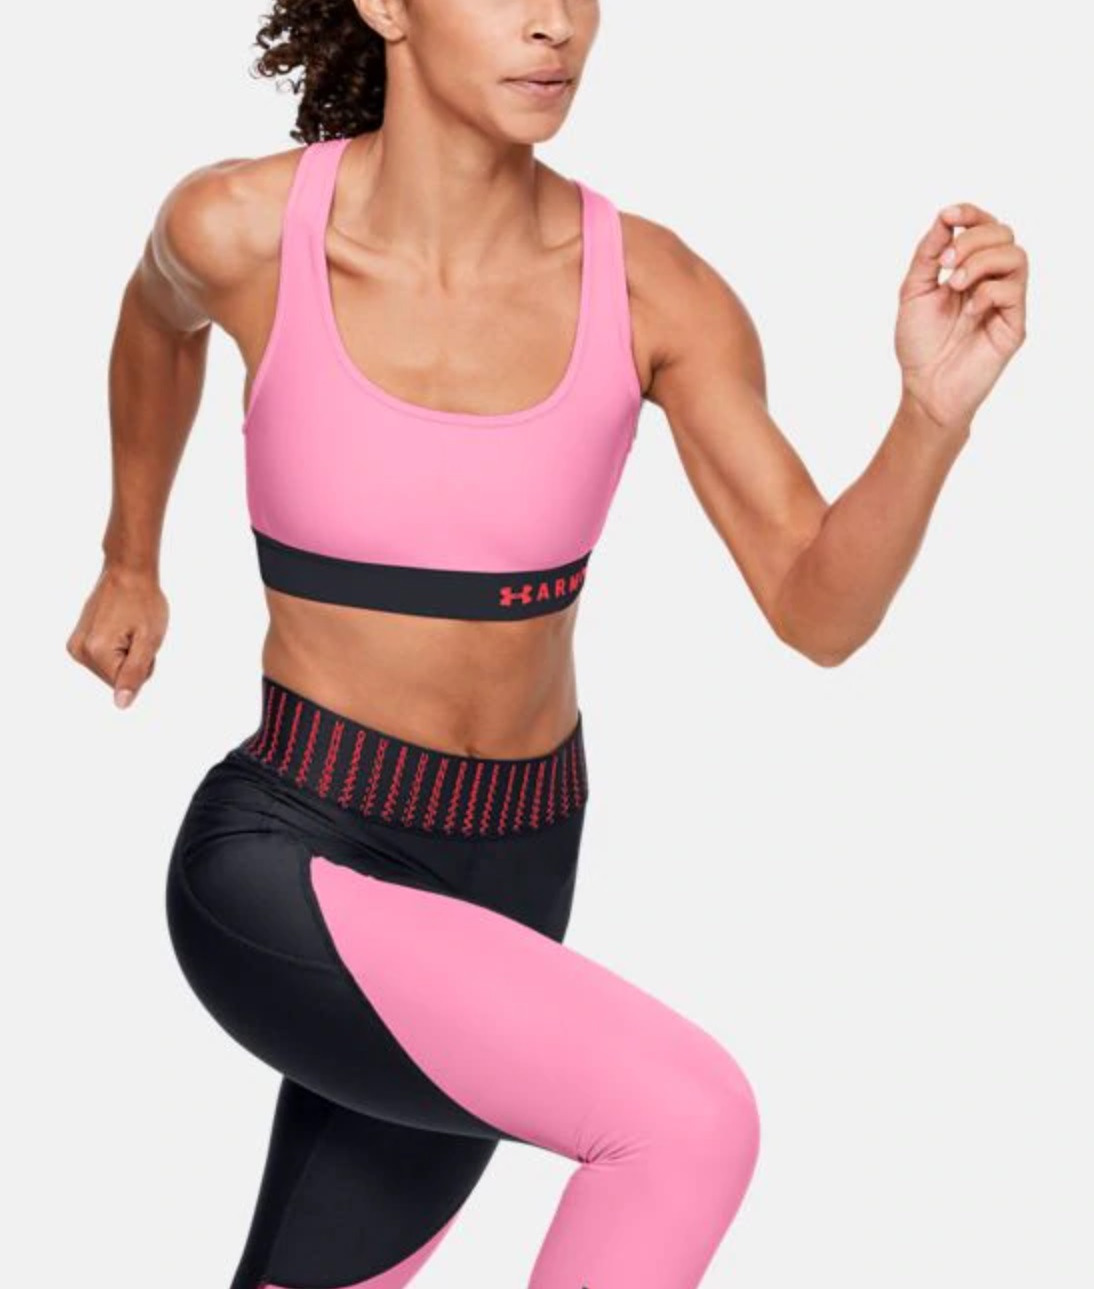 Under Armour Canada Spring Sale Save Up To 40 Off T Shirts Shorts Shoes Sports Bra And More